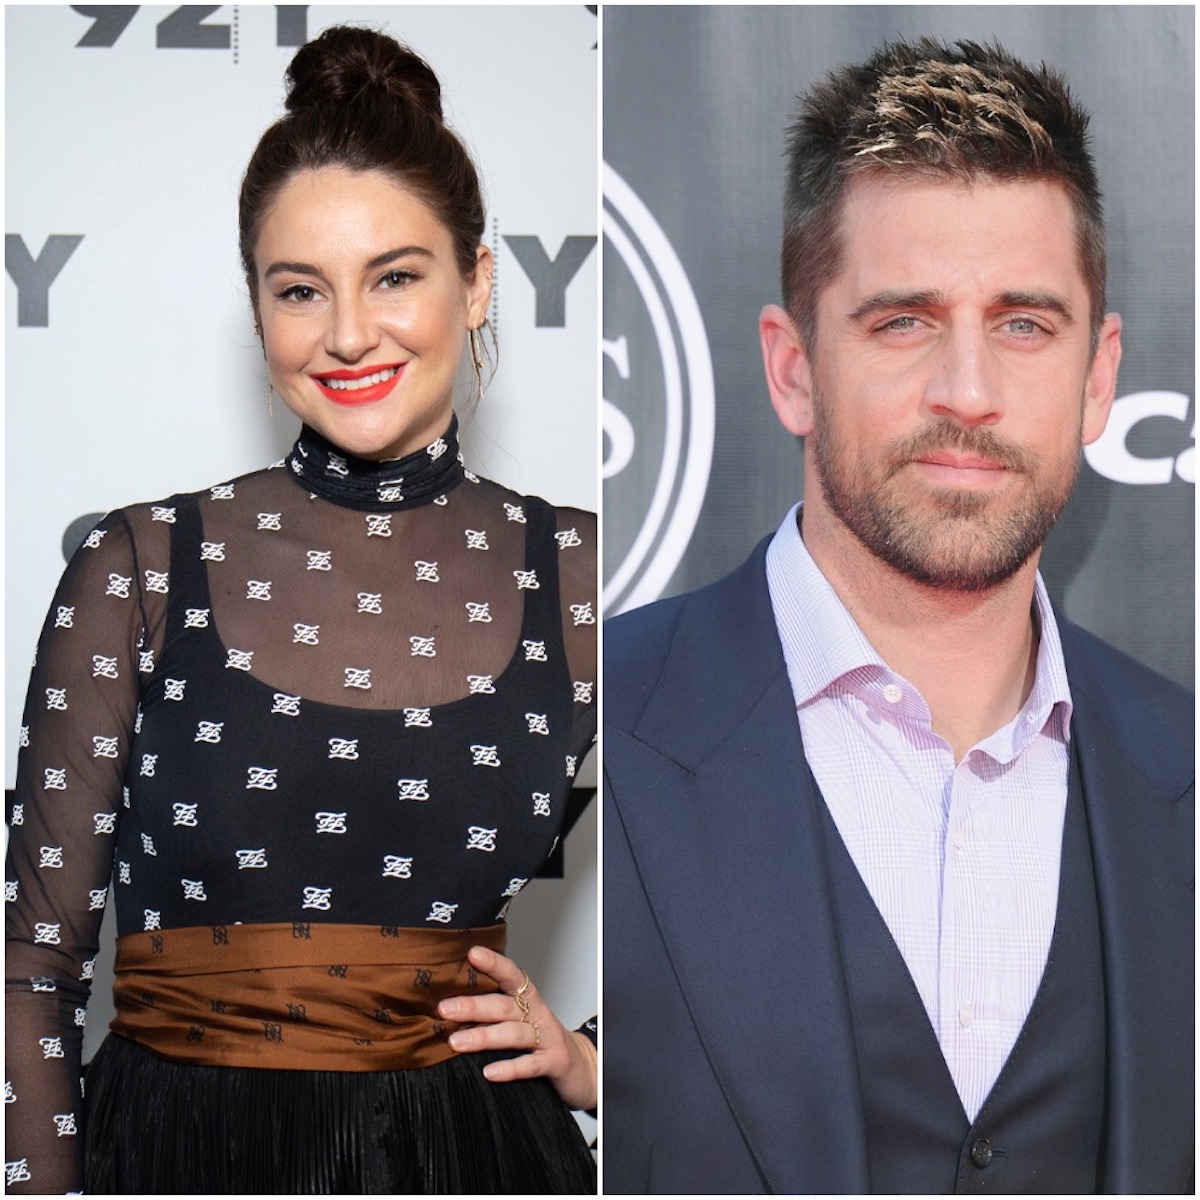 Shailene Woodley smiles on the red carpet and Aaron Rodgers looks into camera